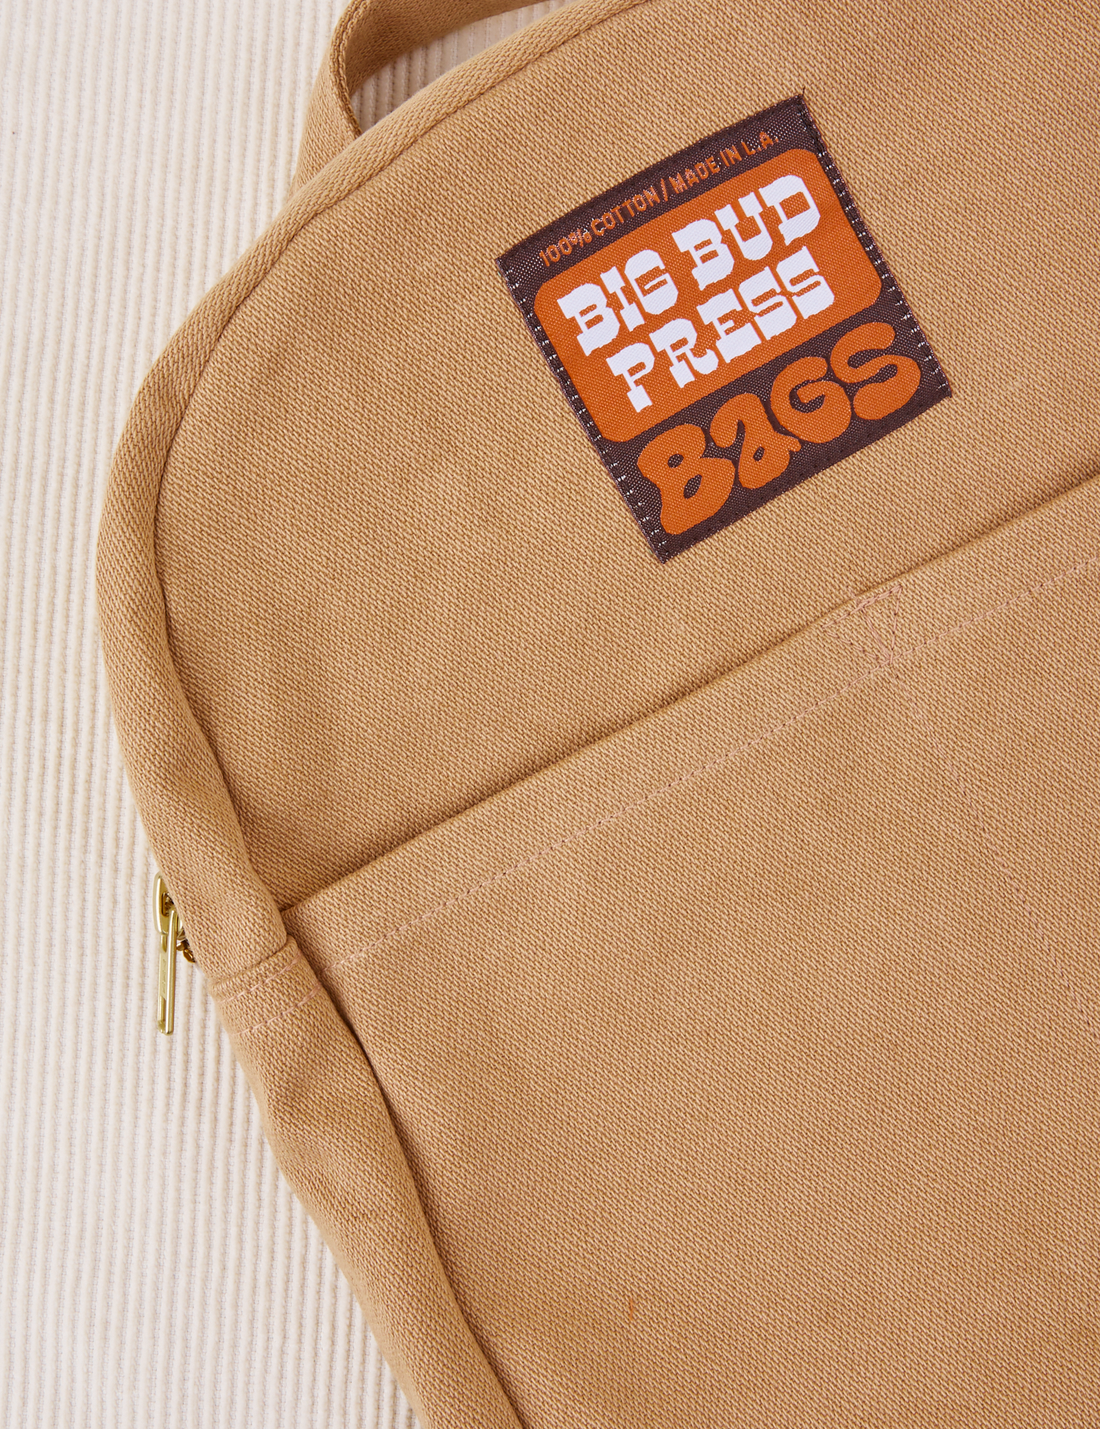 Mini Backpack in Tan close up with brown and orange Big Bud Press label